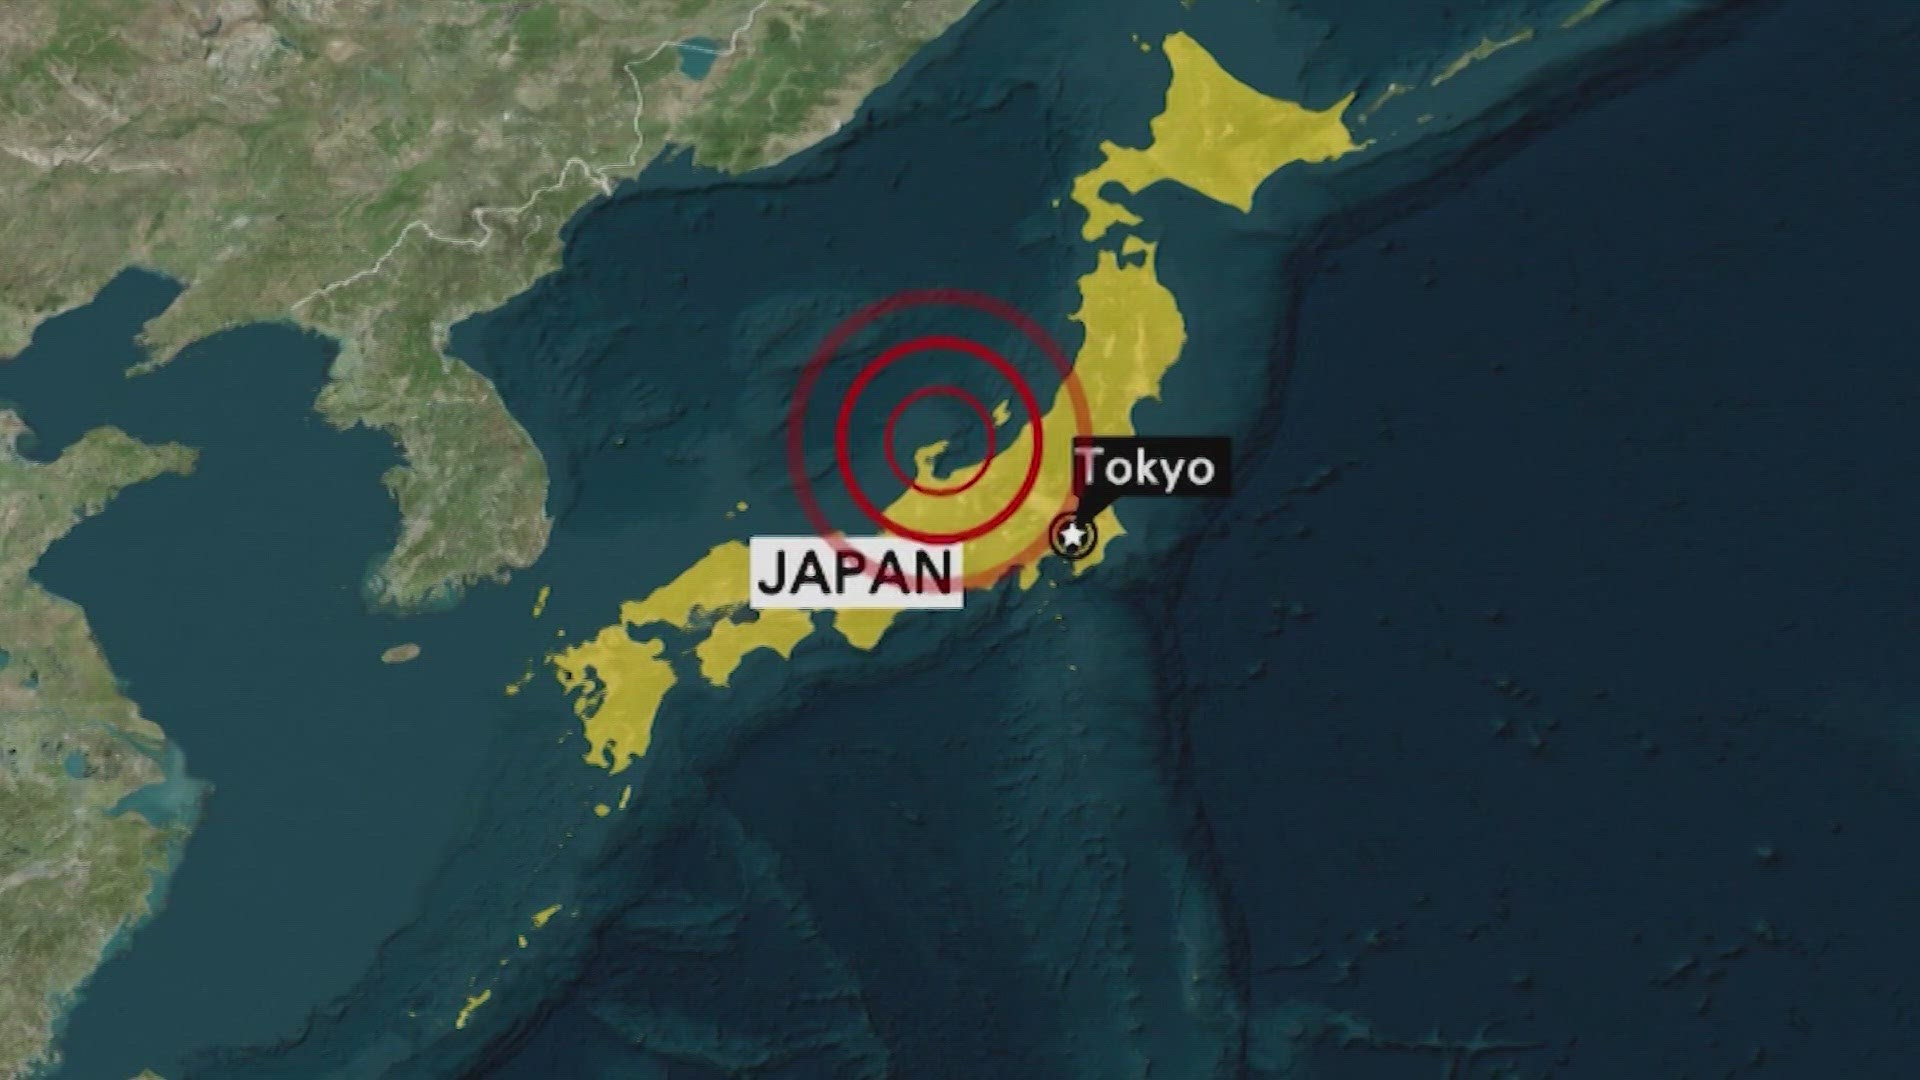 Officials say 48 people were confirmed dead in Ishikawa and 16 others were seriously injured.